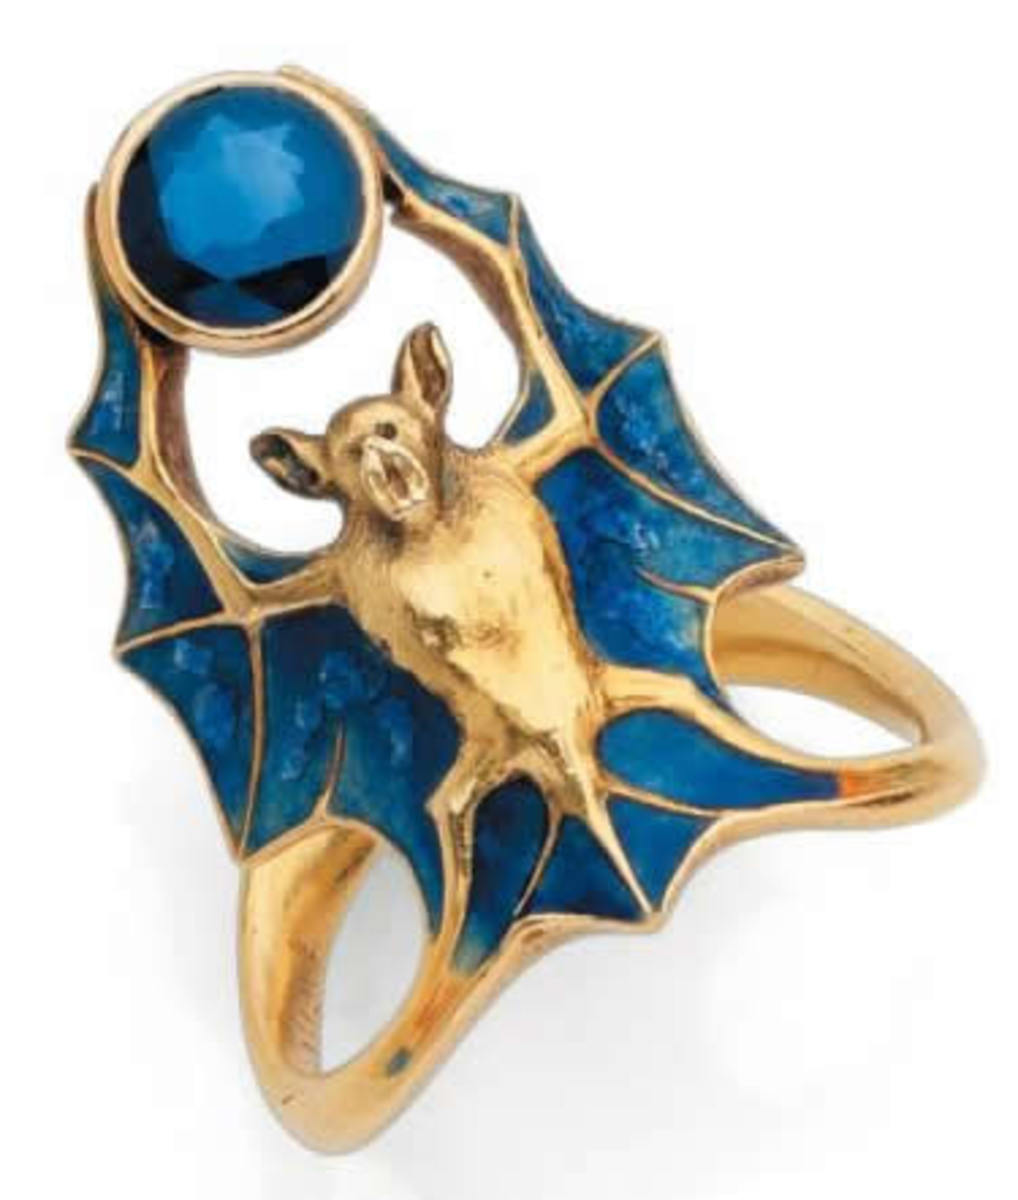 Another chauve-souris (bat) ring by René Lalique, circa 1901, featuring a gold and blue enamel flying bat with an overhead sapphire. This sold for $44,645 at Piasa.